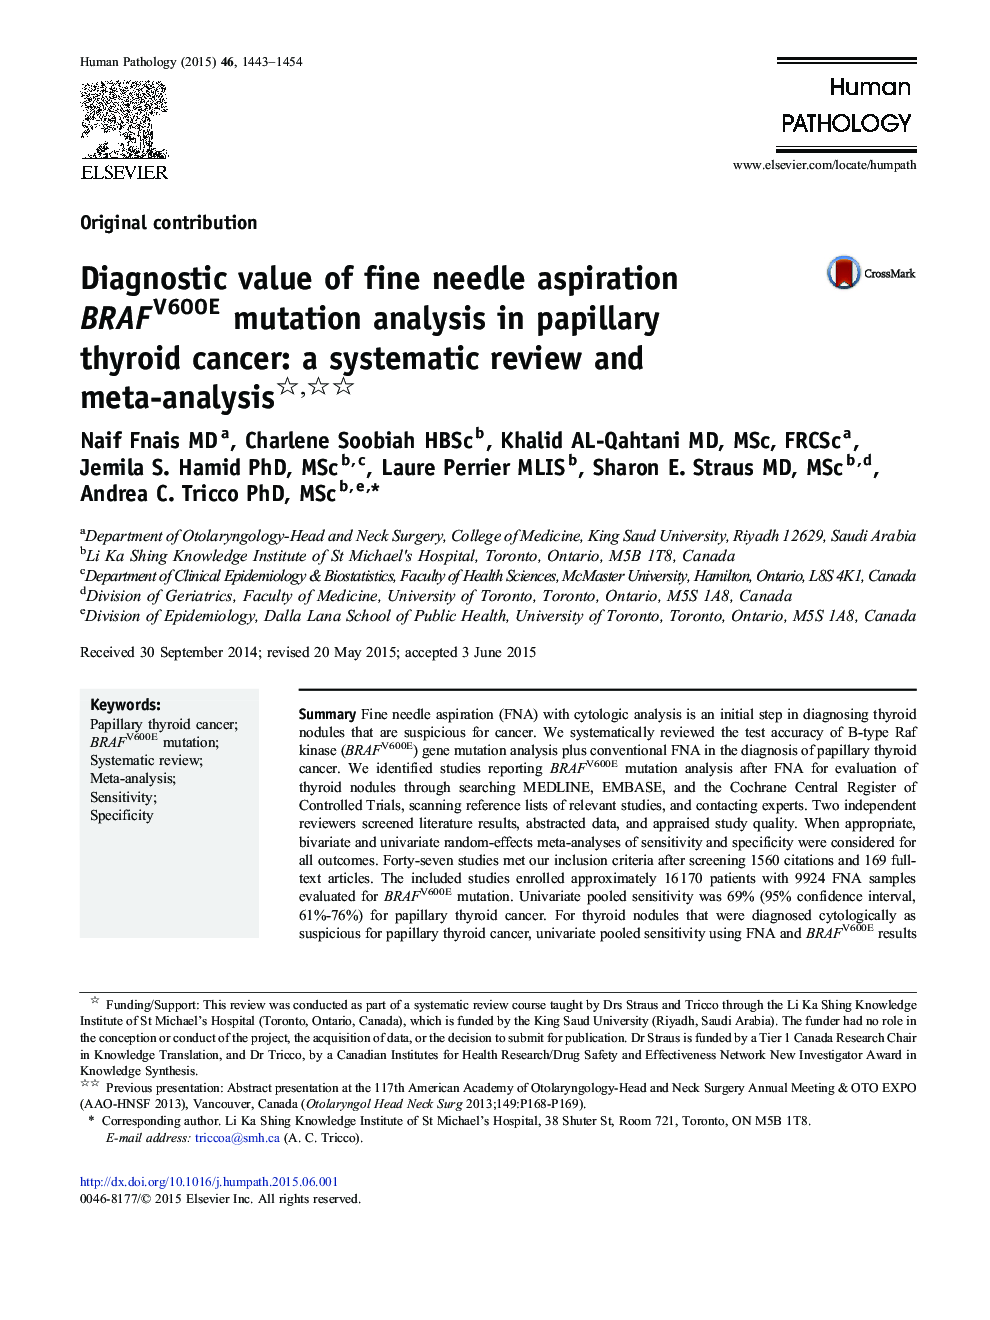 Diagnostic value of fine needle aspiration BRAFV600E mutation analysis in papillary thyroid cancer: a systematic review and meta-analysis 